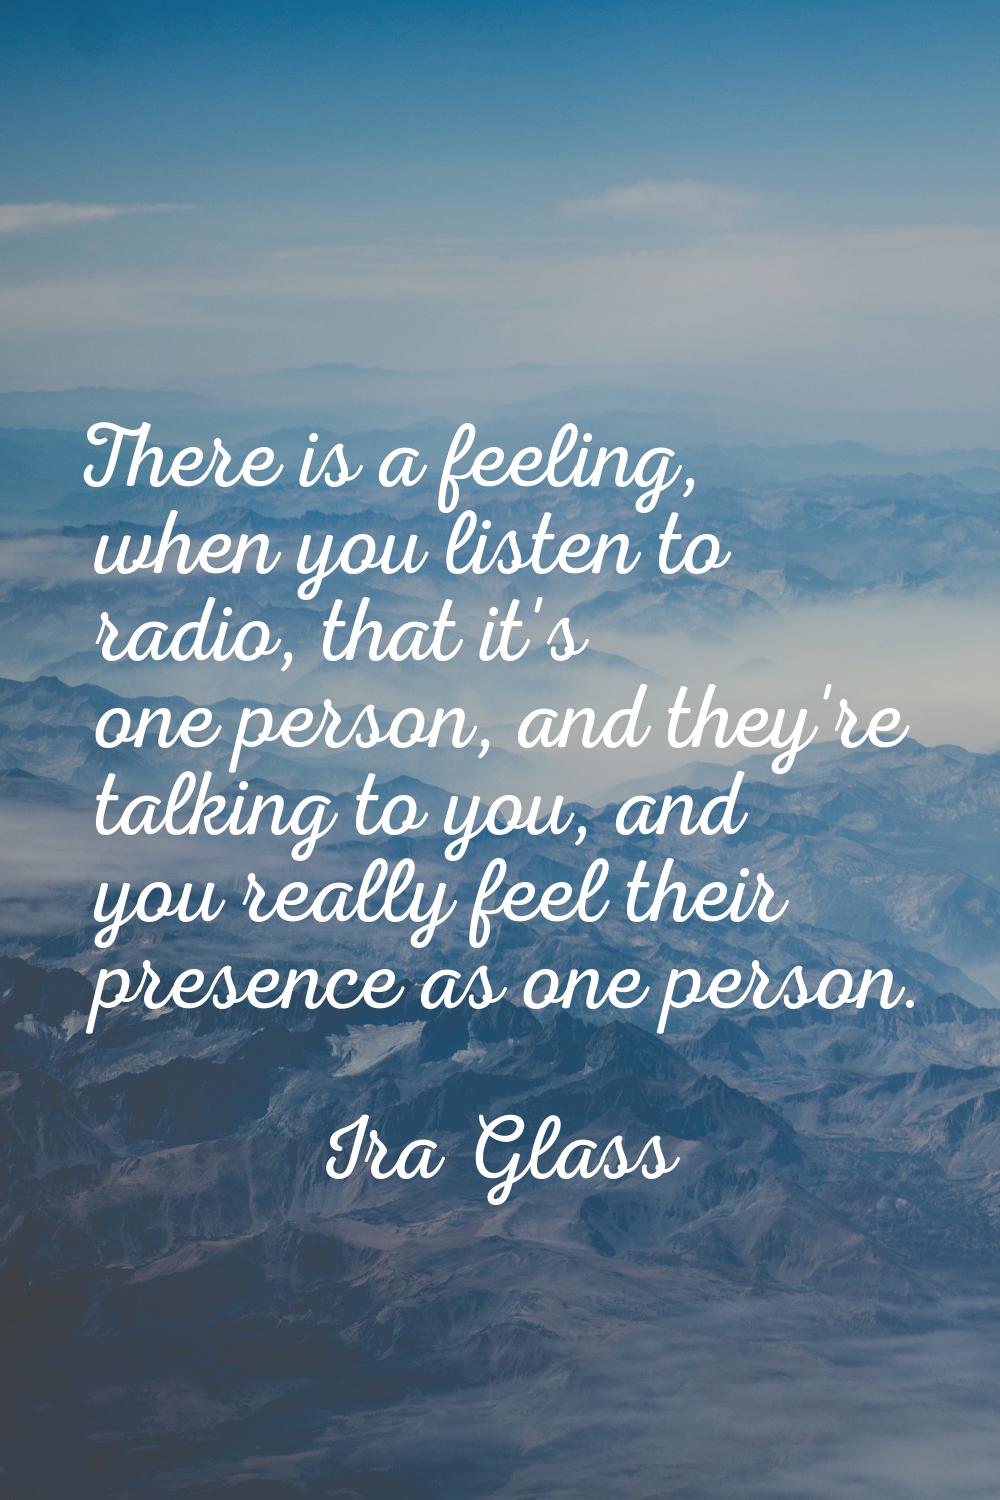 There is a feeling, when you listen to radio, that it's one person, and they're talking to you, and